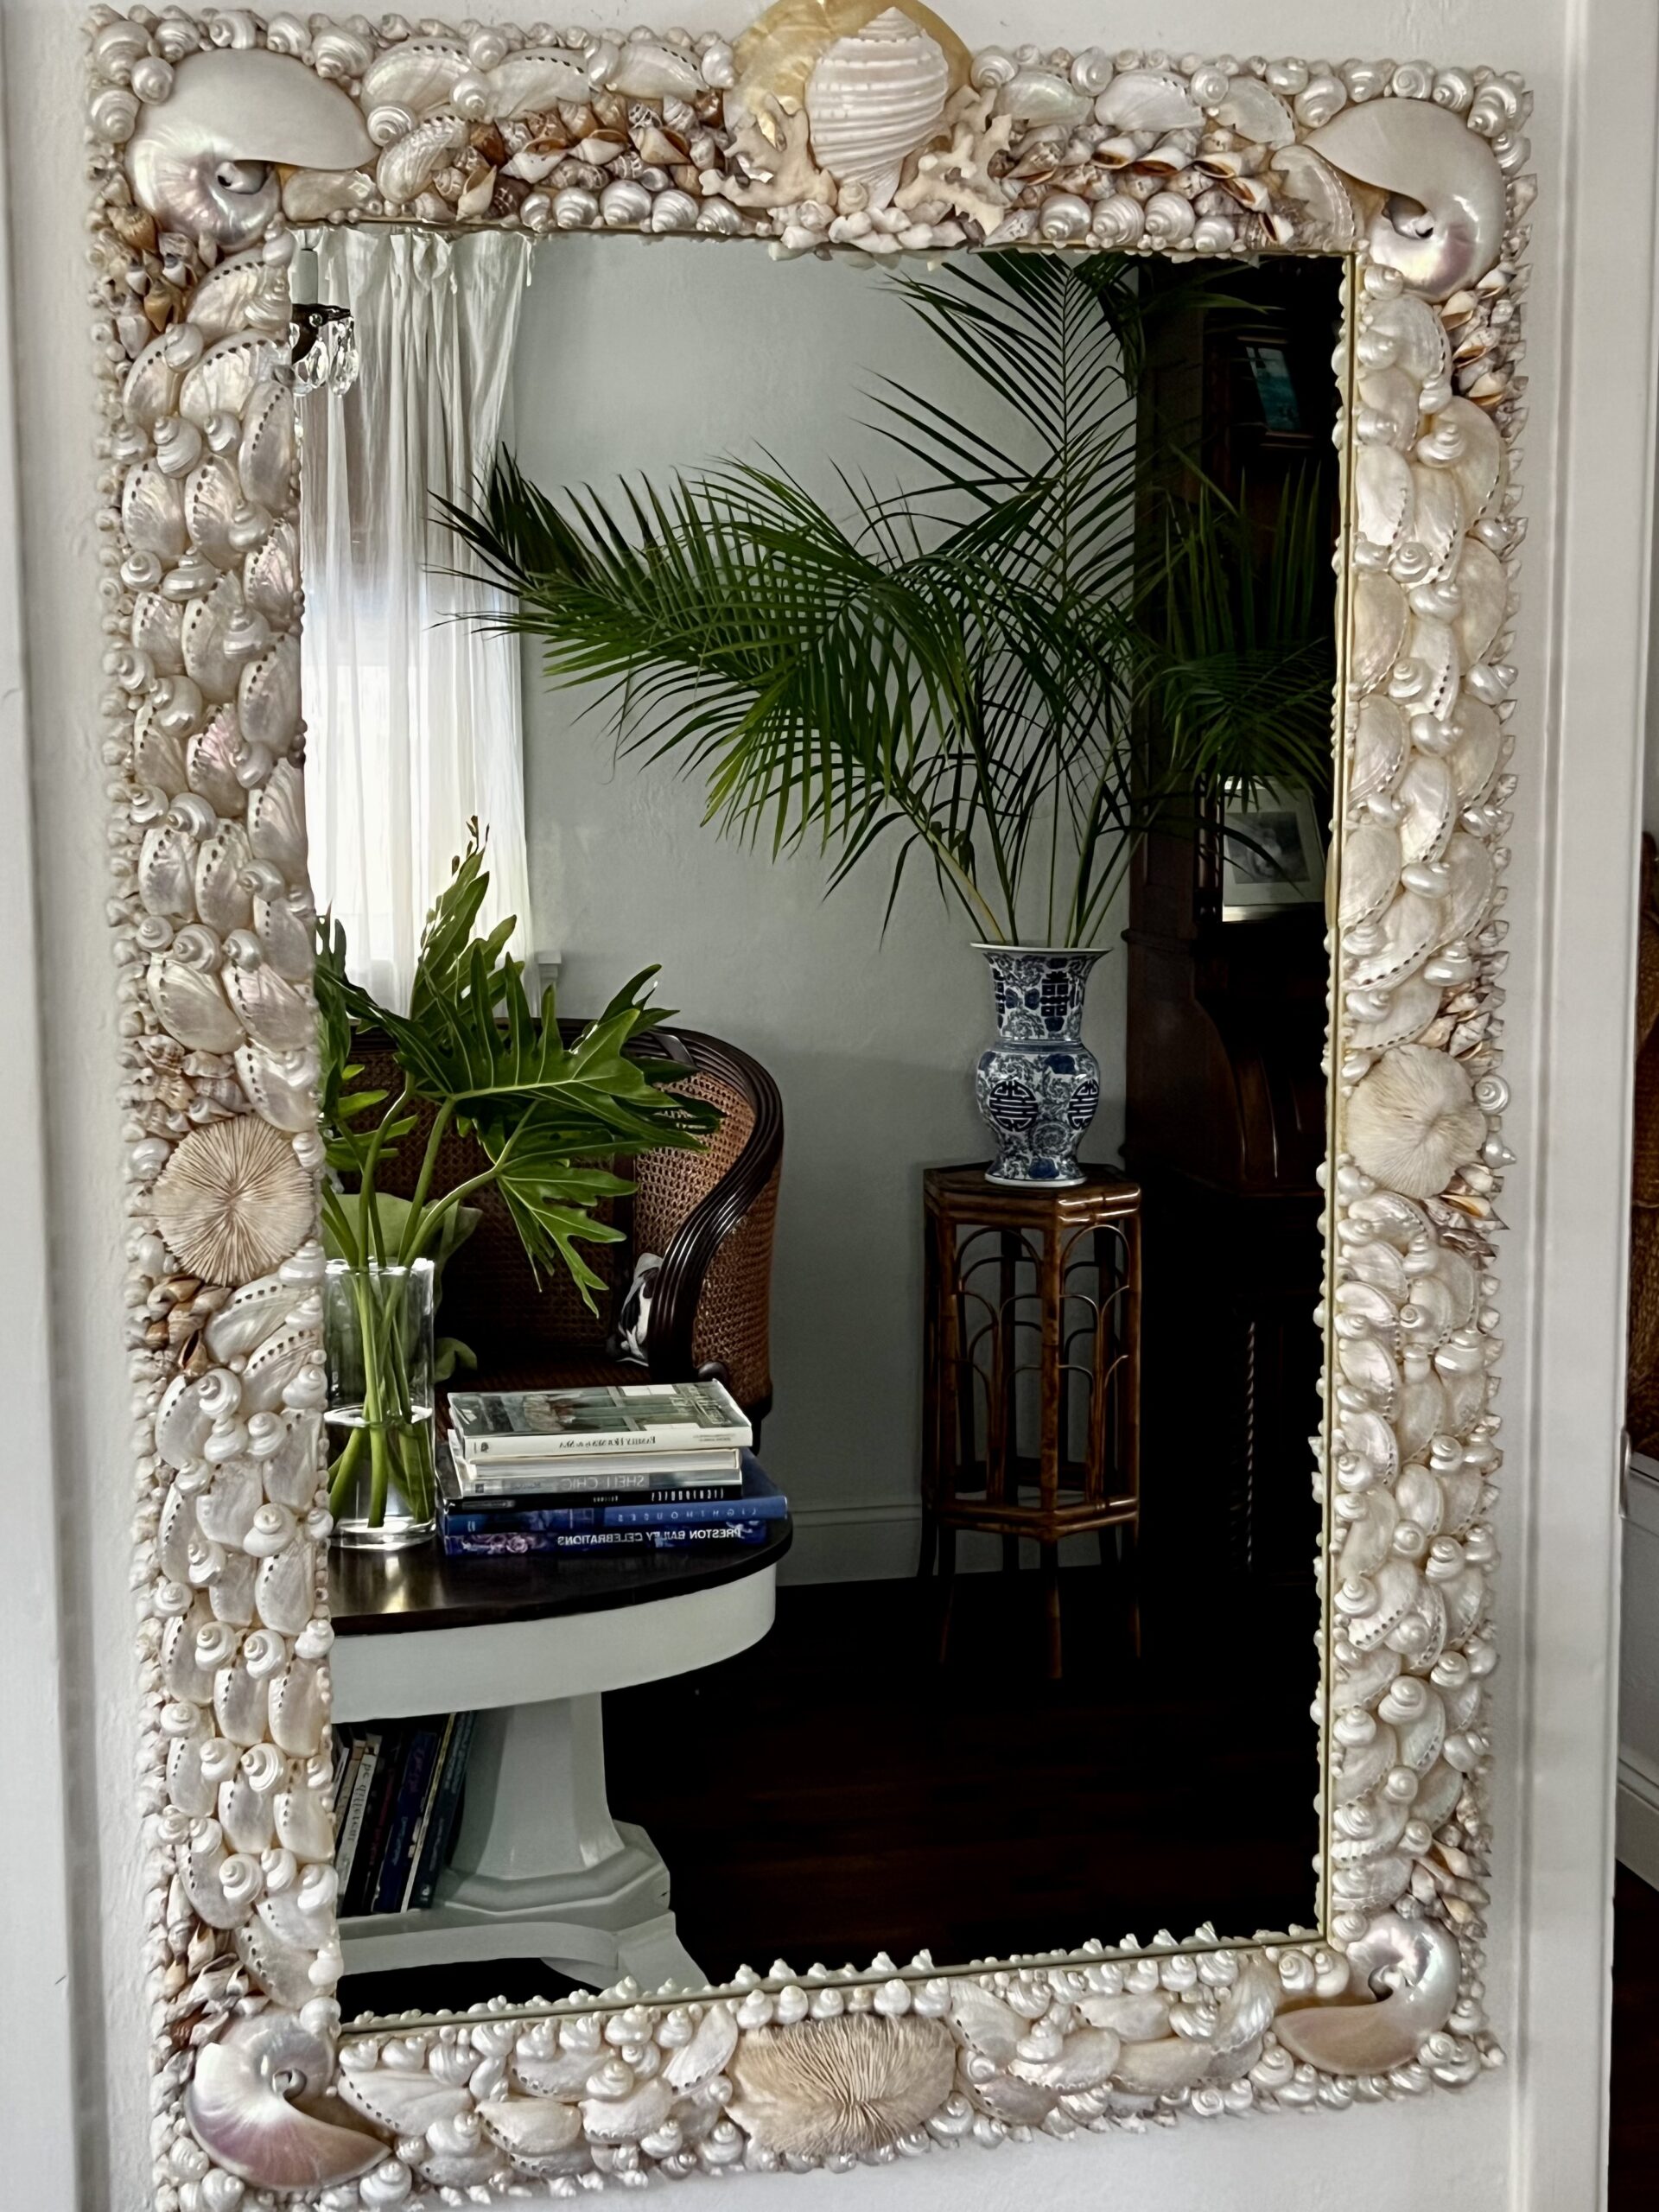 Large mirror made with white shells. Palm trees reflected.